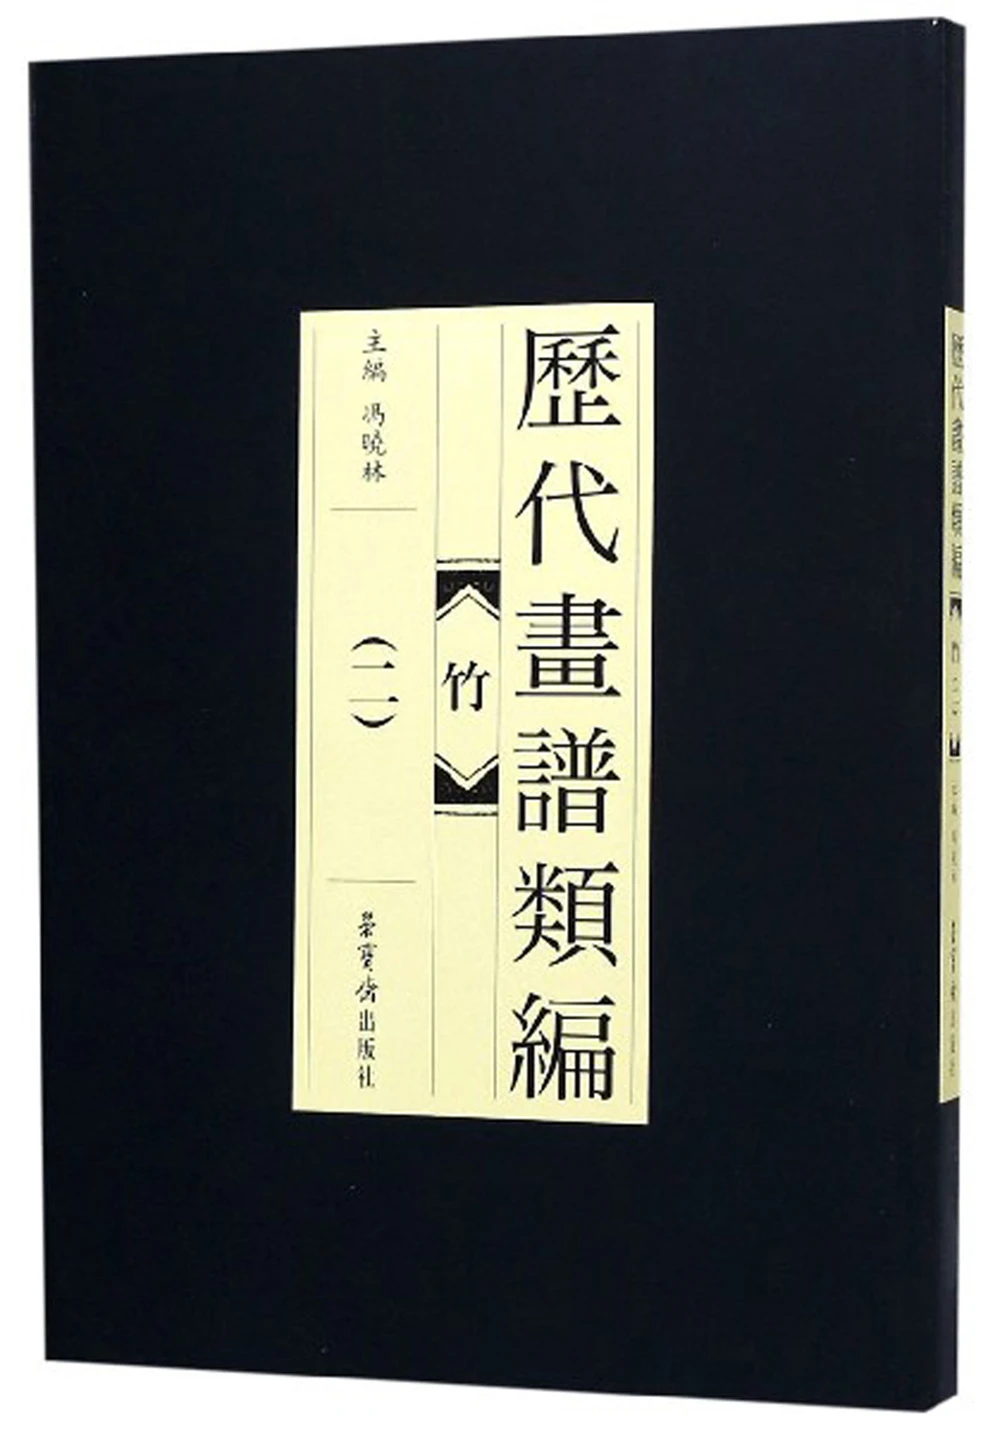 

Bamboo (Part 2)-Painting Book Series A Sketch artBook Art Drawing high-quality Painting copyBook for independent training